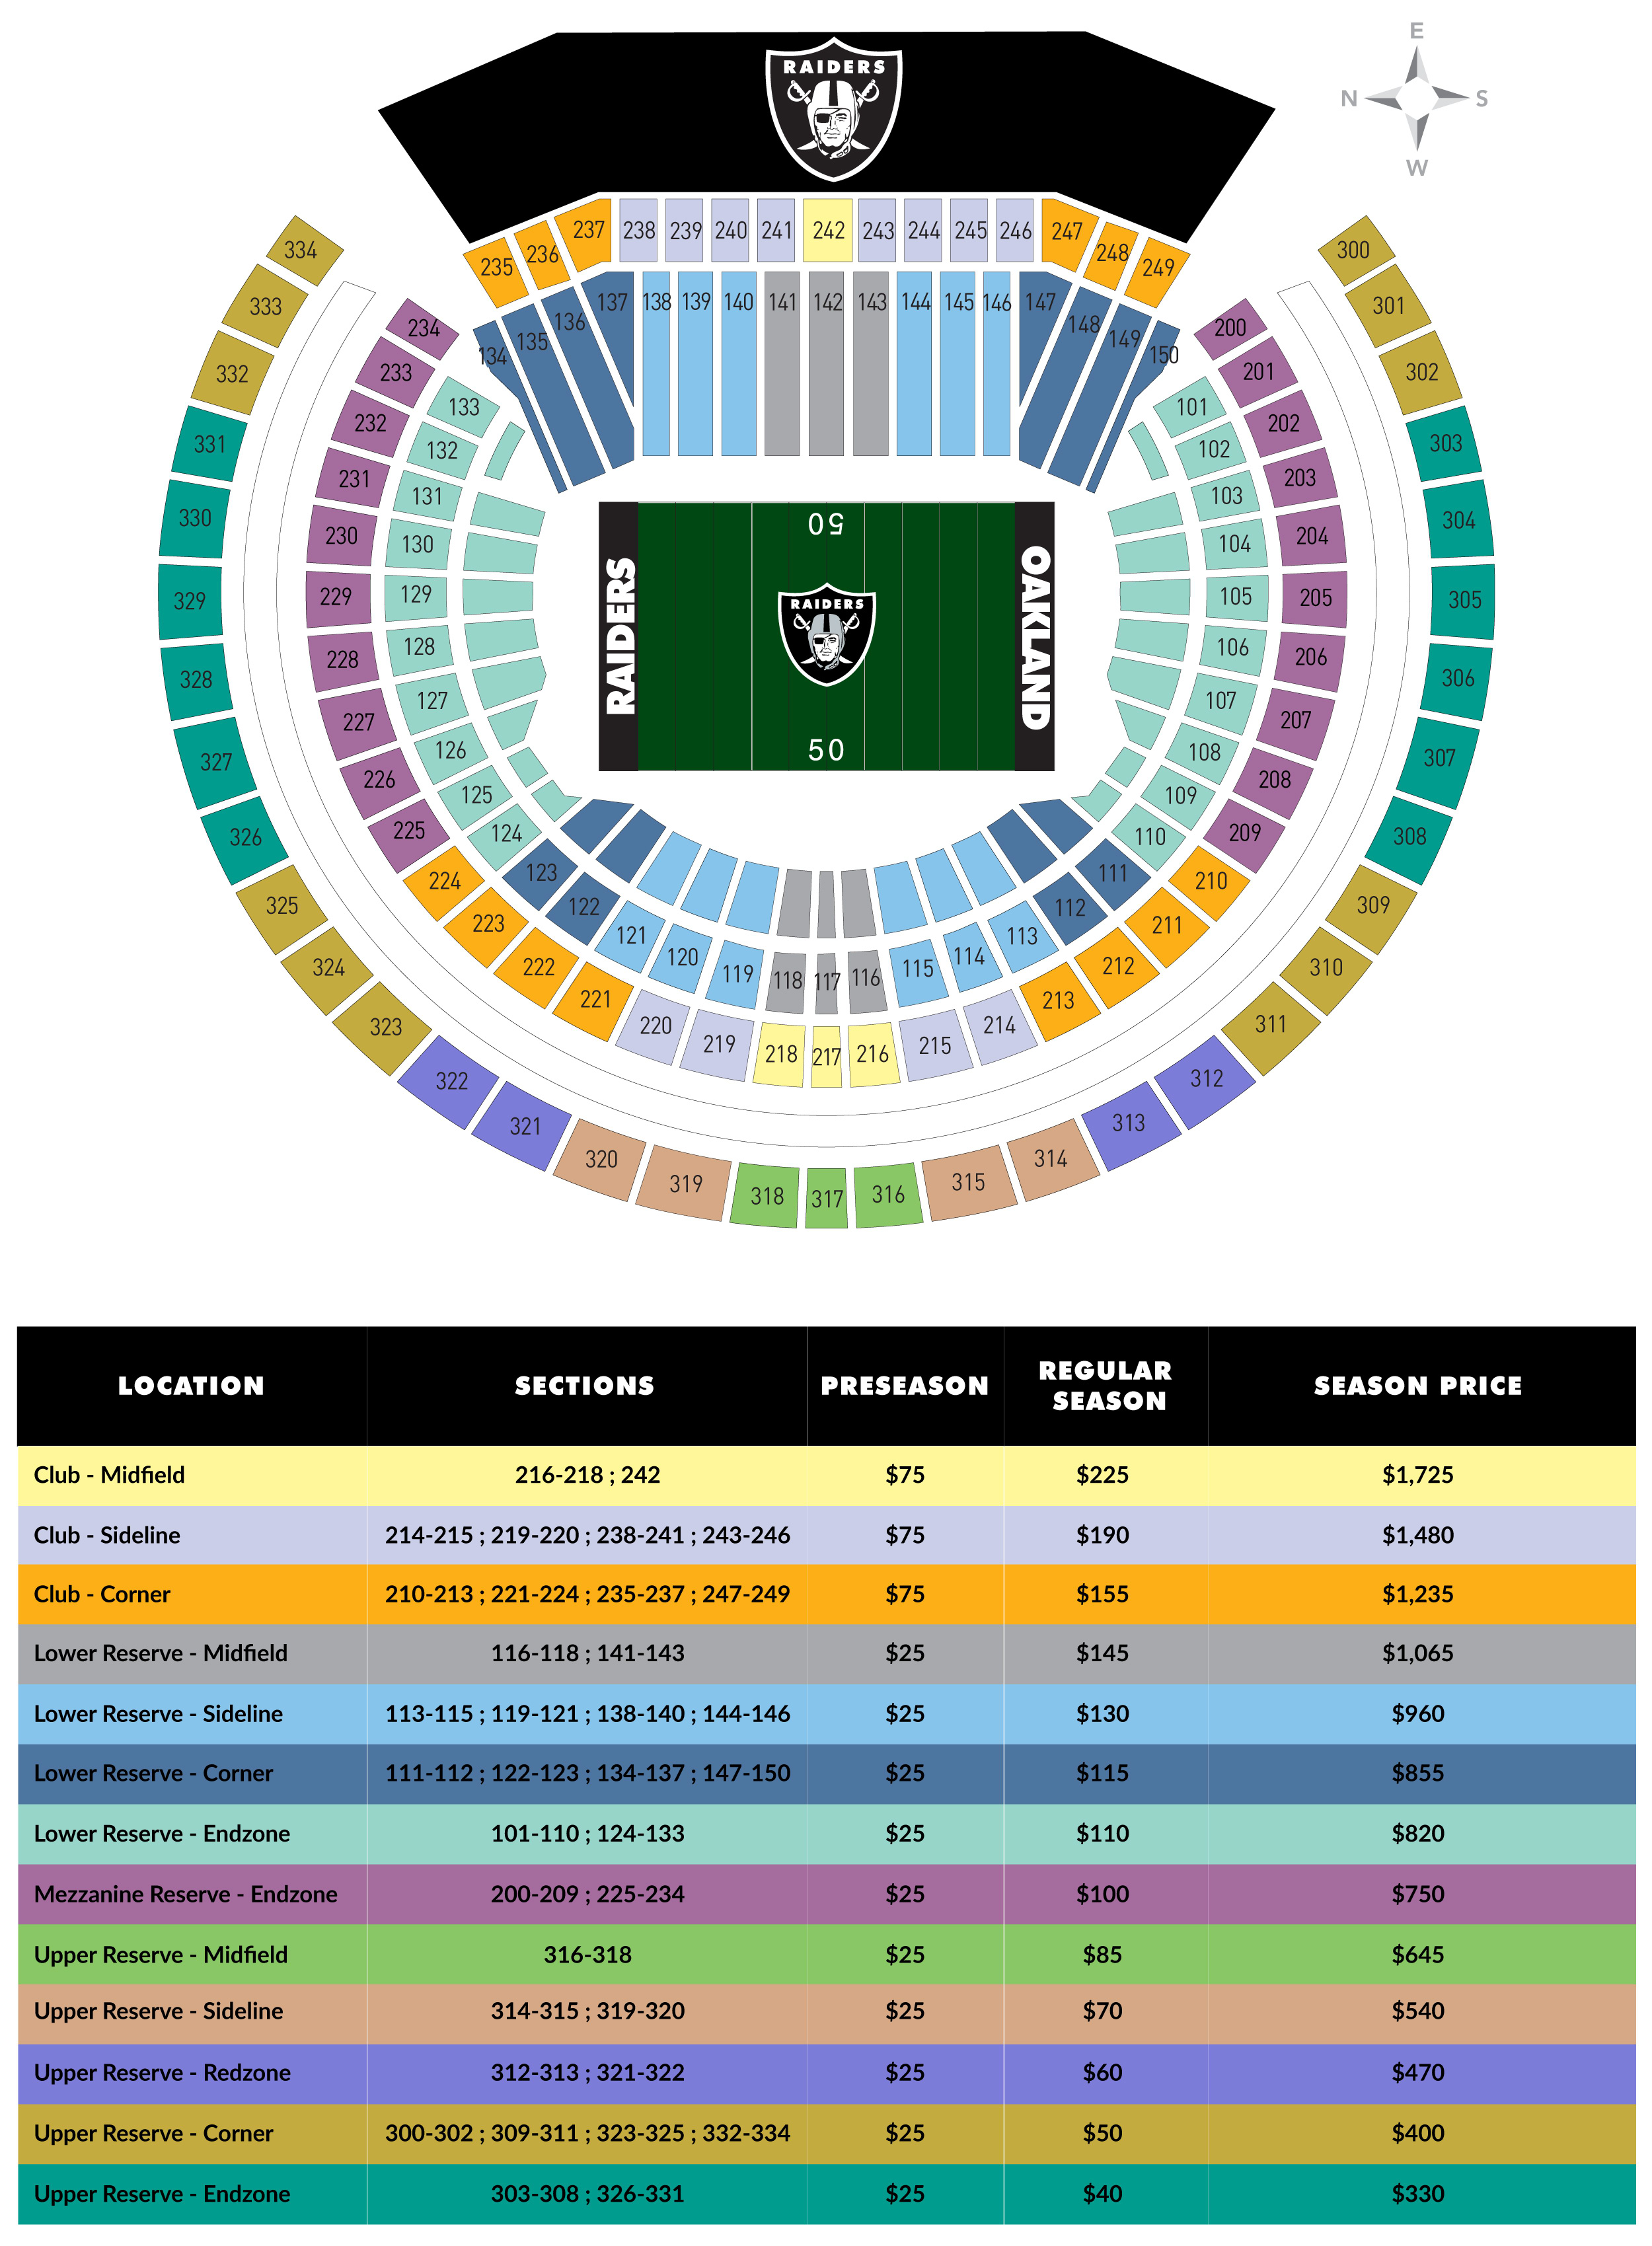 Seating and Pricing Map | Raiders.com